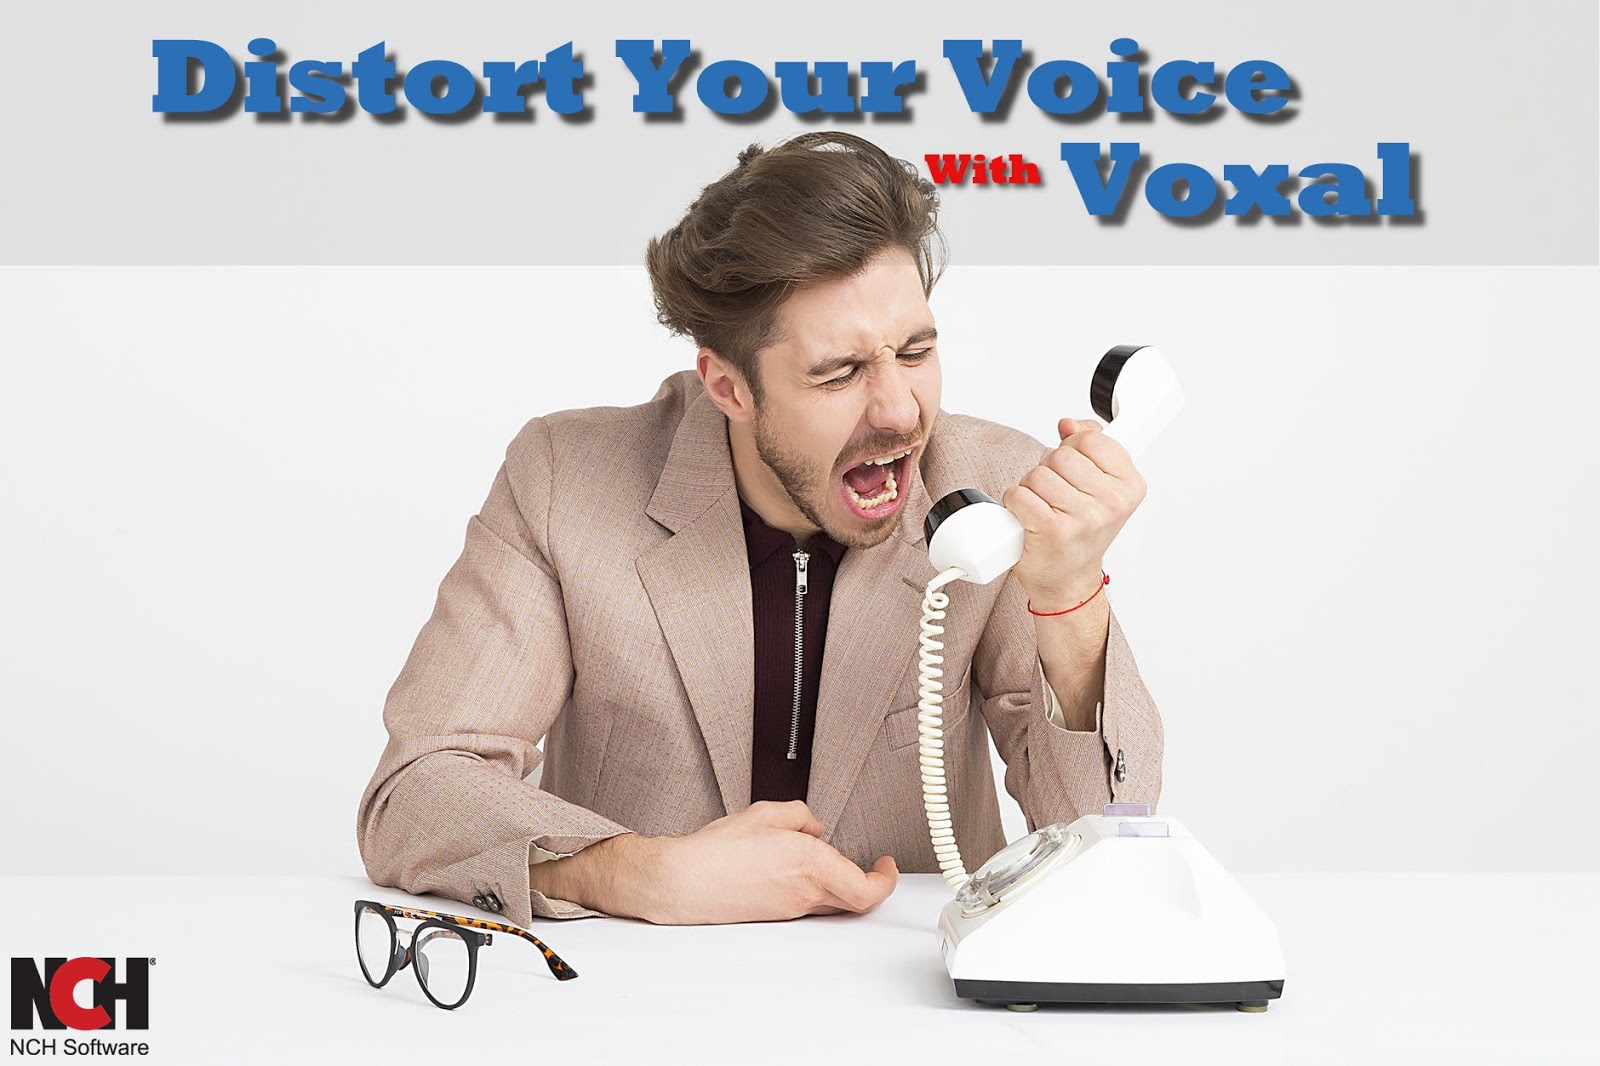 how to stop voxal voice changer